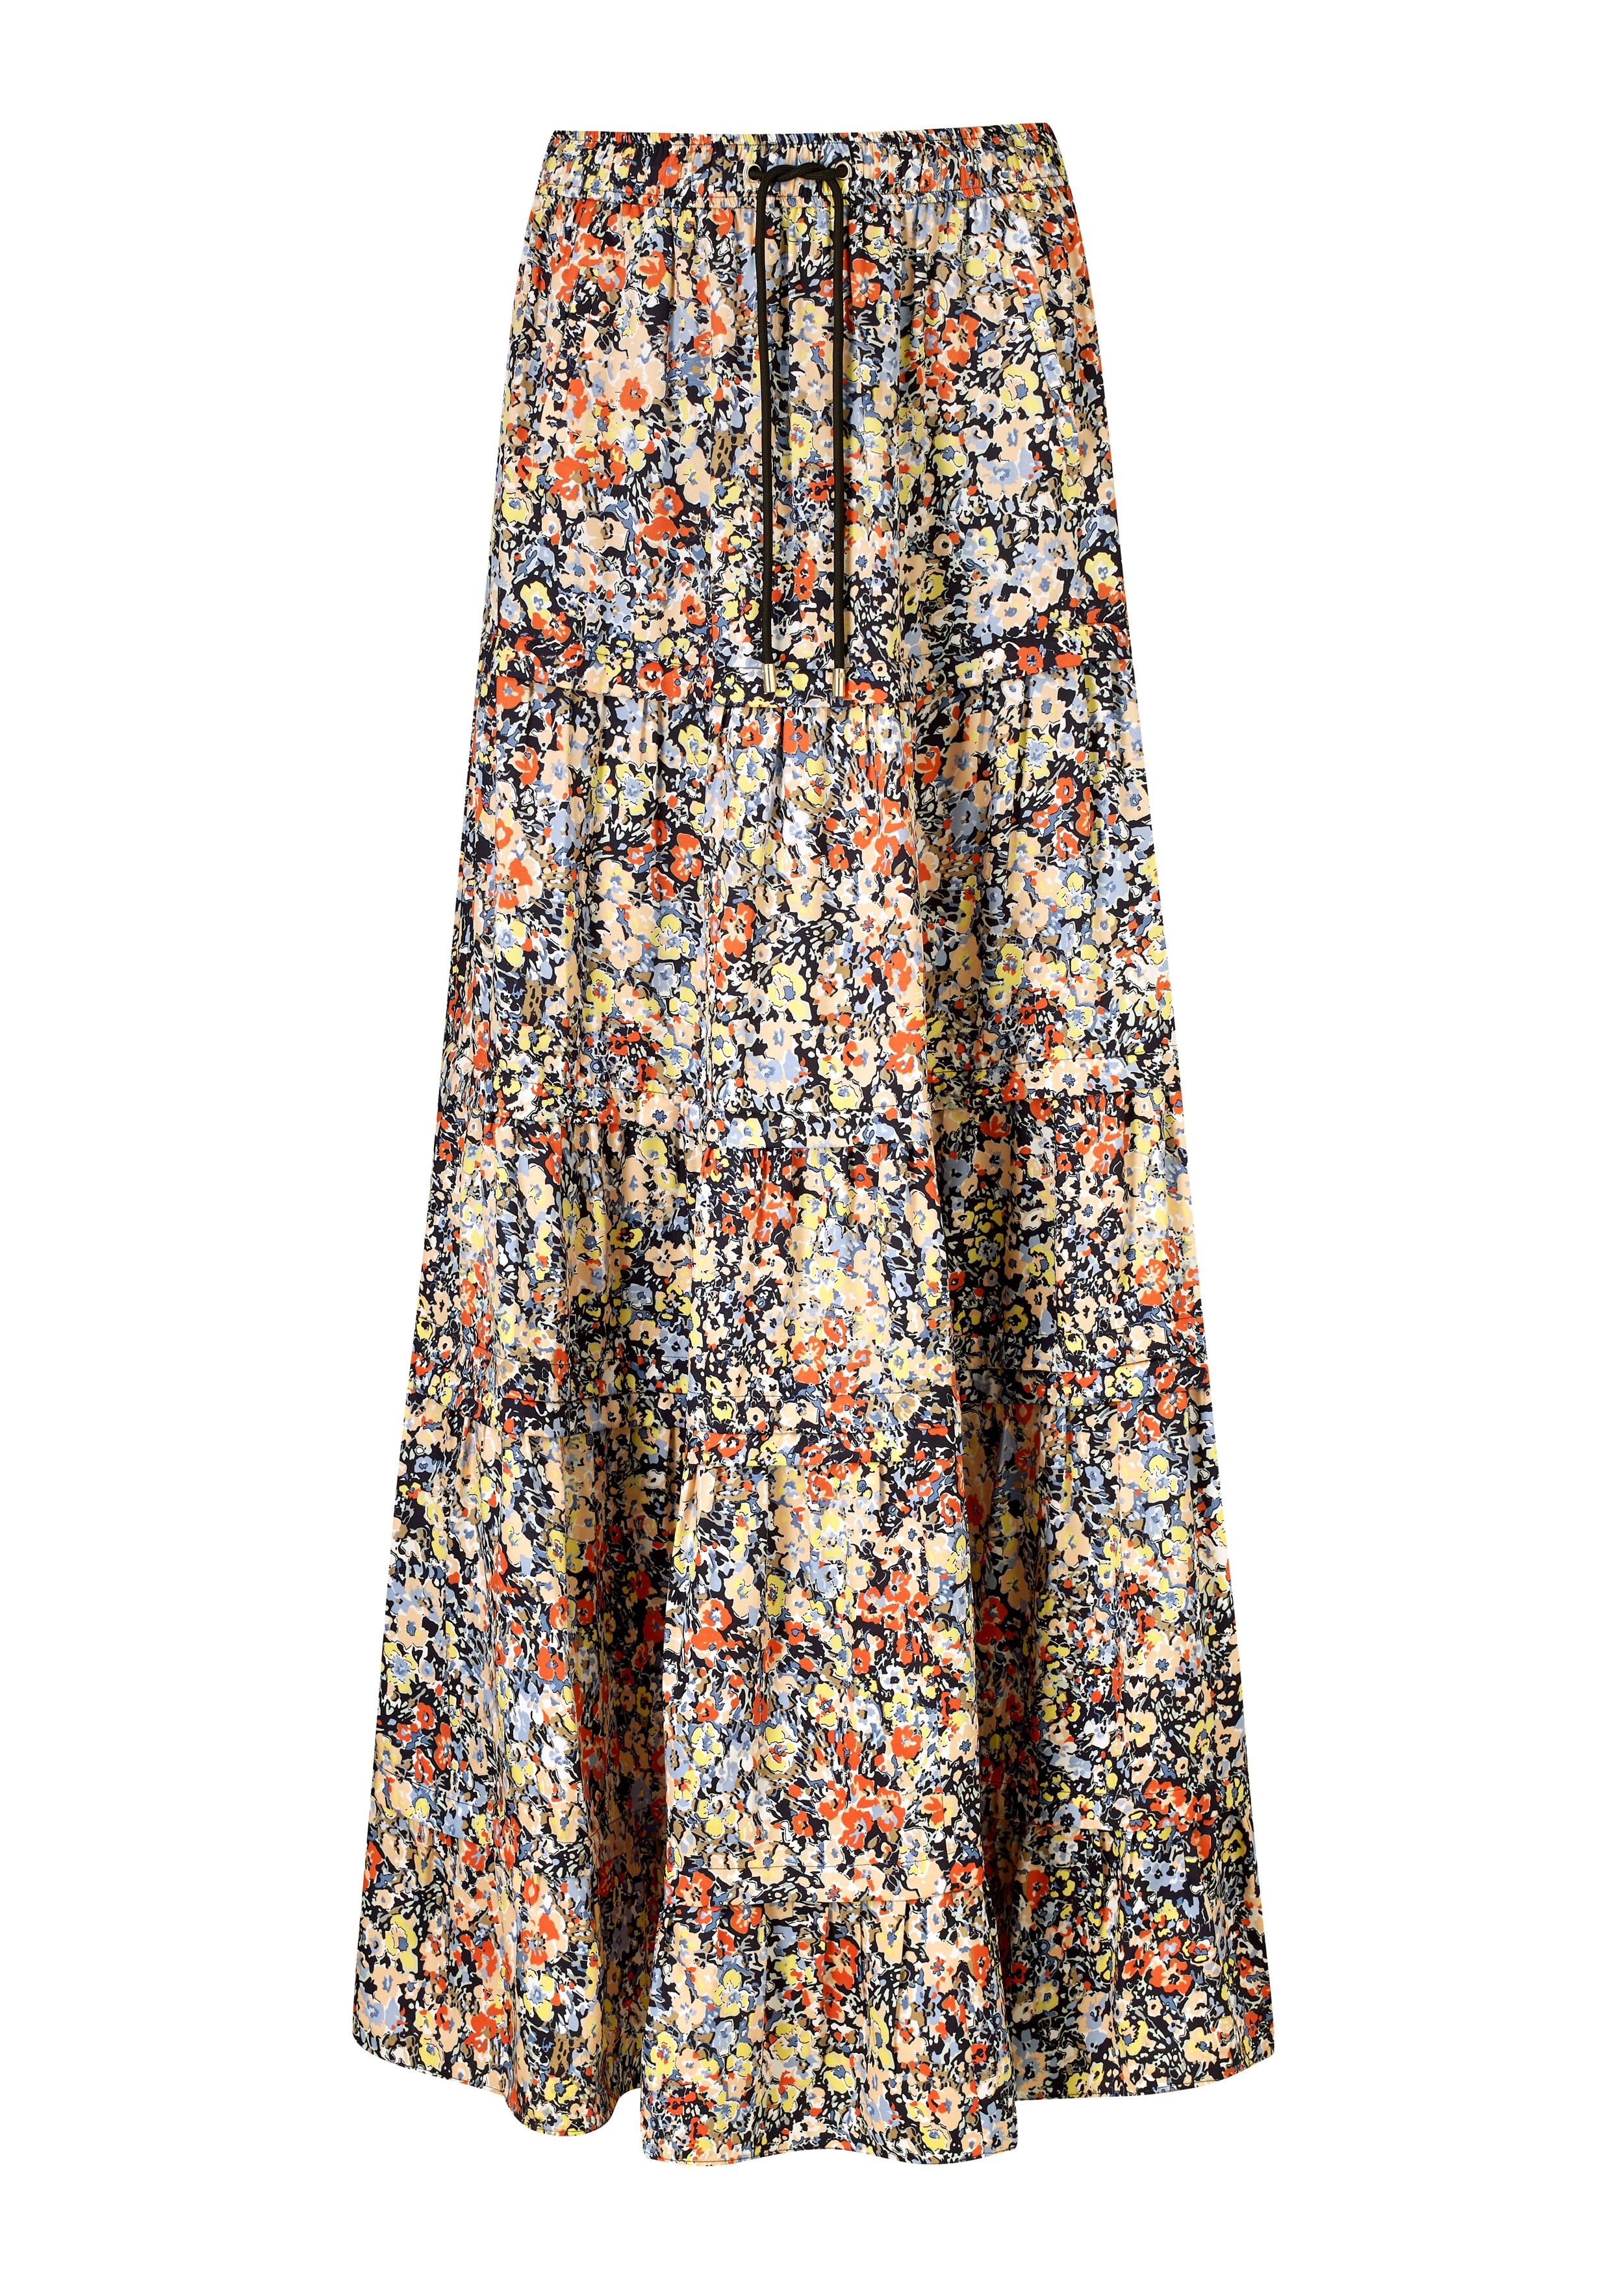 Hand-Painted Floral Maxi Skirt Washed Peach/Yellow/Burnt Orange/Blue